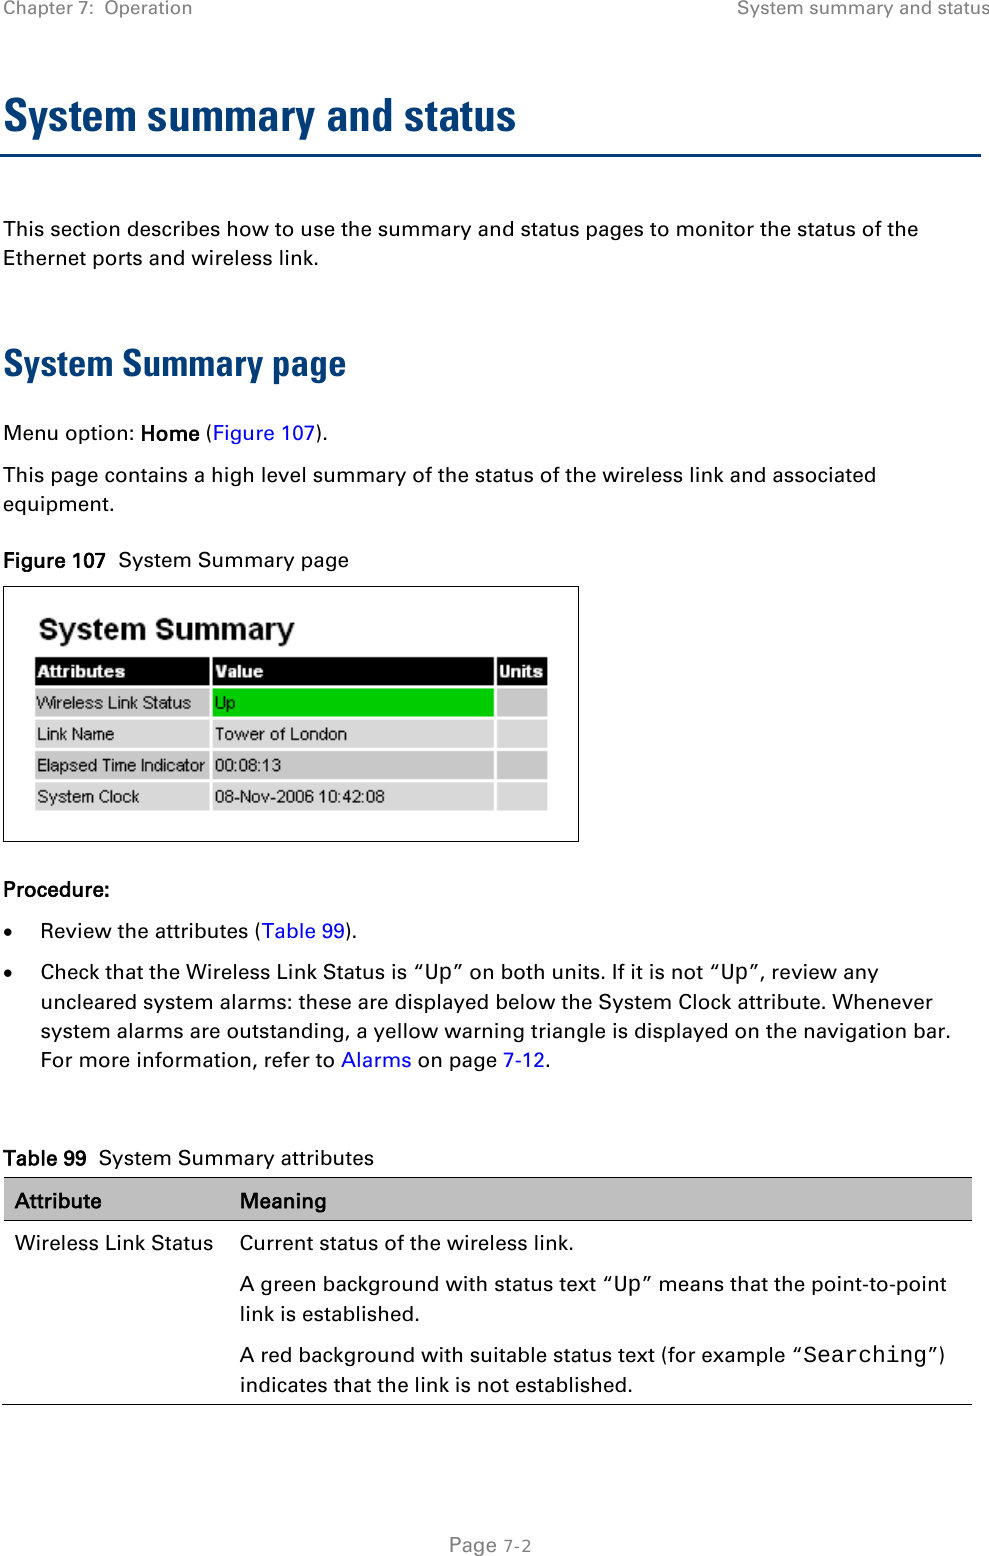 Chapter 7:  Operation System summary and status  System summary and status This section describes how to use the summary and status pages to monitor the status of the Ethernet ports and wireless link.  System Summary page Menu option: Home (Figure 107). This page contains a high level summary of the status of the wireless link and associated equipment. Figure 107  System Summary page  Procedure: • Review the attributes (Table 99). • Check that the Wireless Link Status is “Up” on both units. If it is not “Up”, review any uncleared system alarms: these are displayed below the System Clock attribute. Whenever system alarms are outstanding, a yellow warning triangle is displayed on the navigation bar. For more information, refer to Alarms on page 7-12.  Table 99  System Summary attributes Attribute Meaning Wireless Link Status Current status of the wireless link.  A green background with status text “Up” means that the point-to-point link is established. A red background with suitable status text (for example “Searching”) indicates that the link is not established.   Page 7-2 